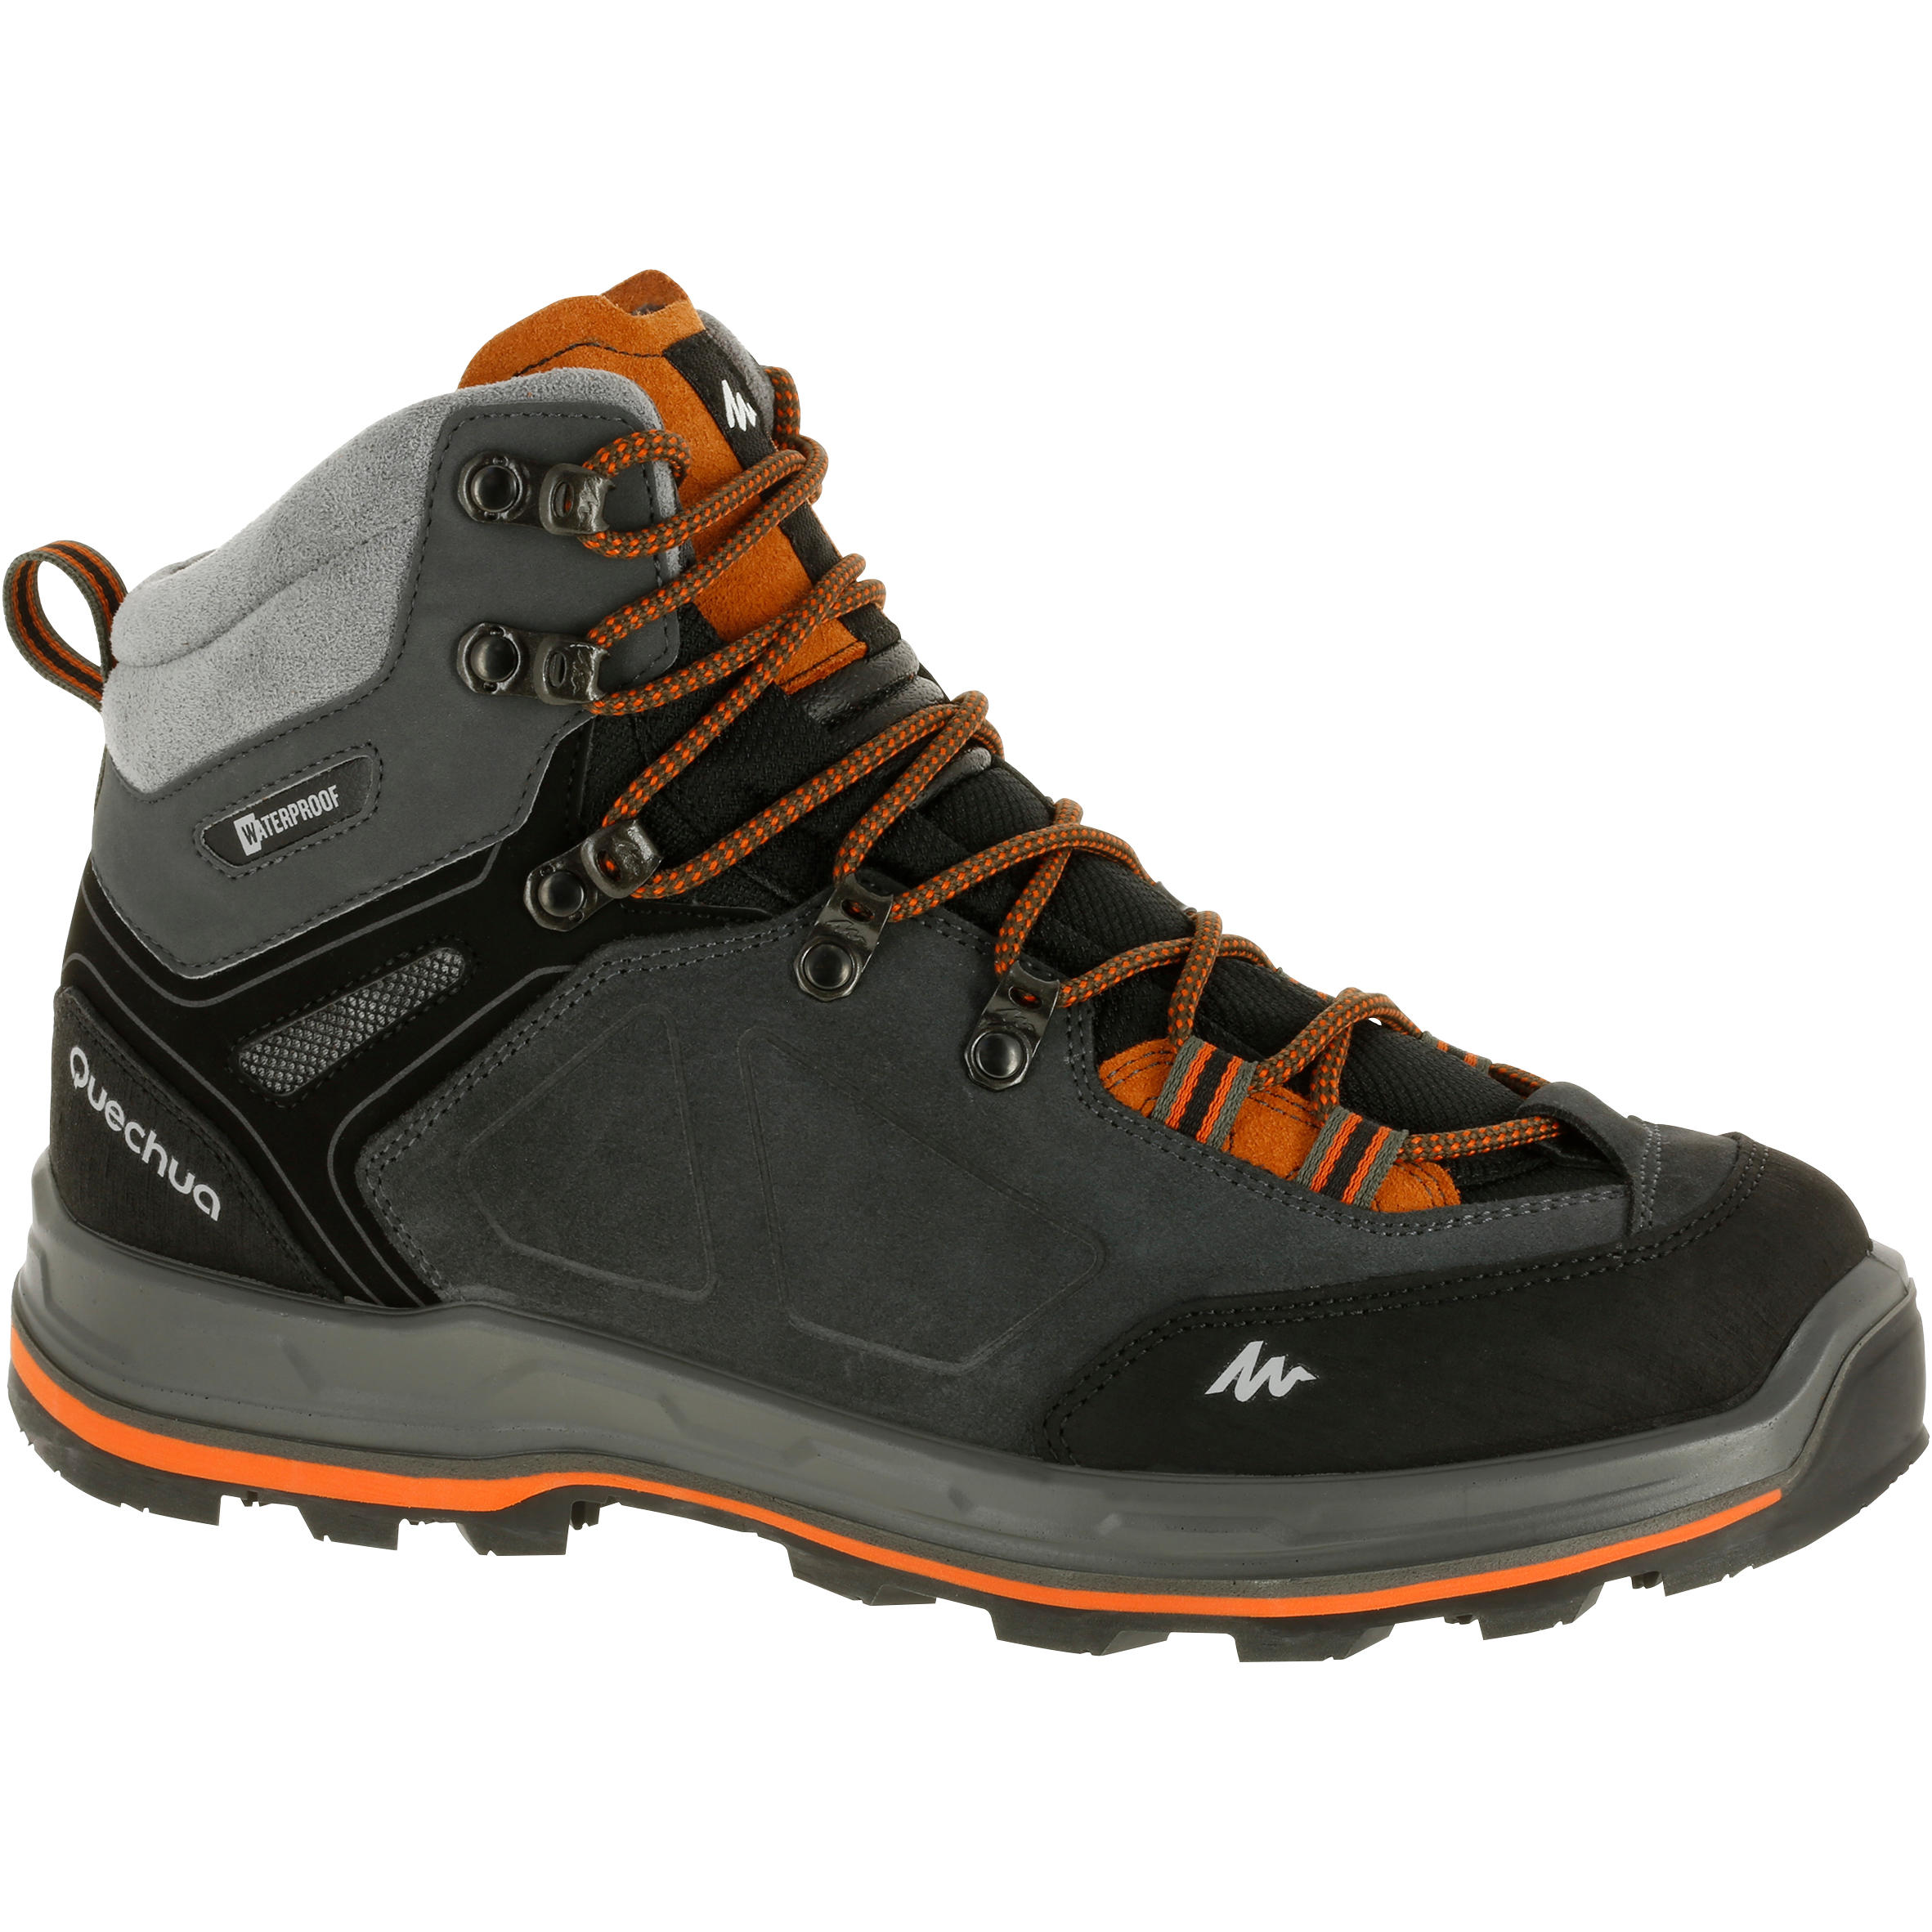 Forclaz Men's Waterproof Leather Hiking Boots - On-trail 100 Grey